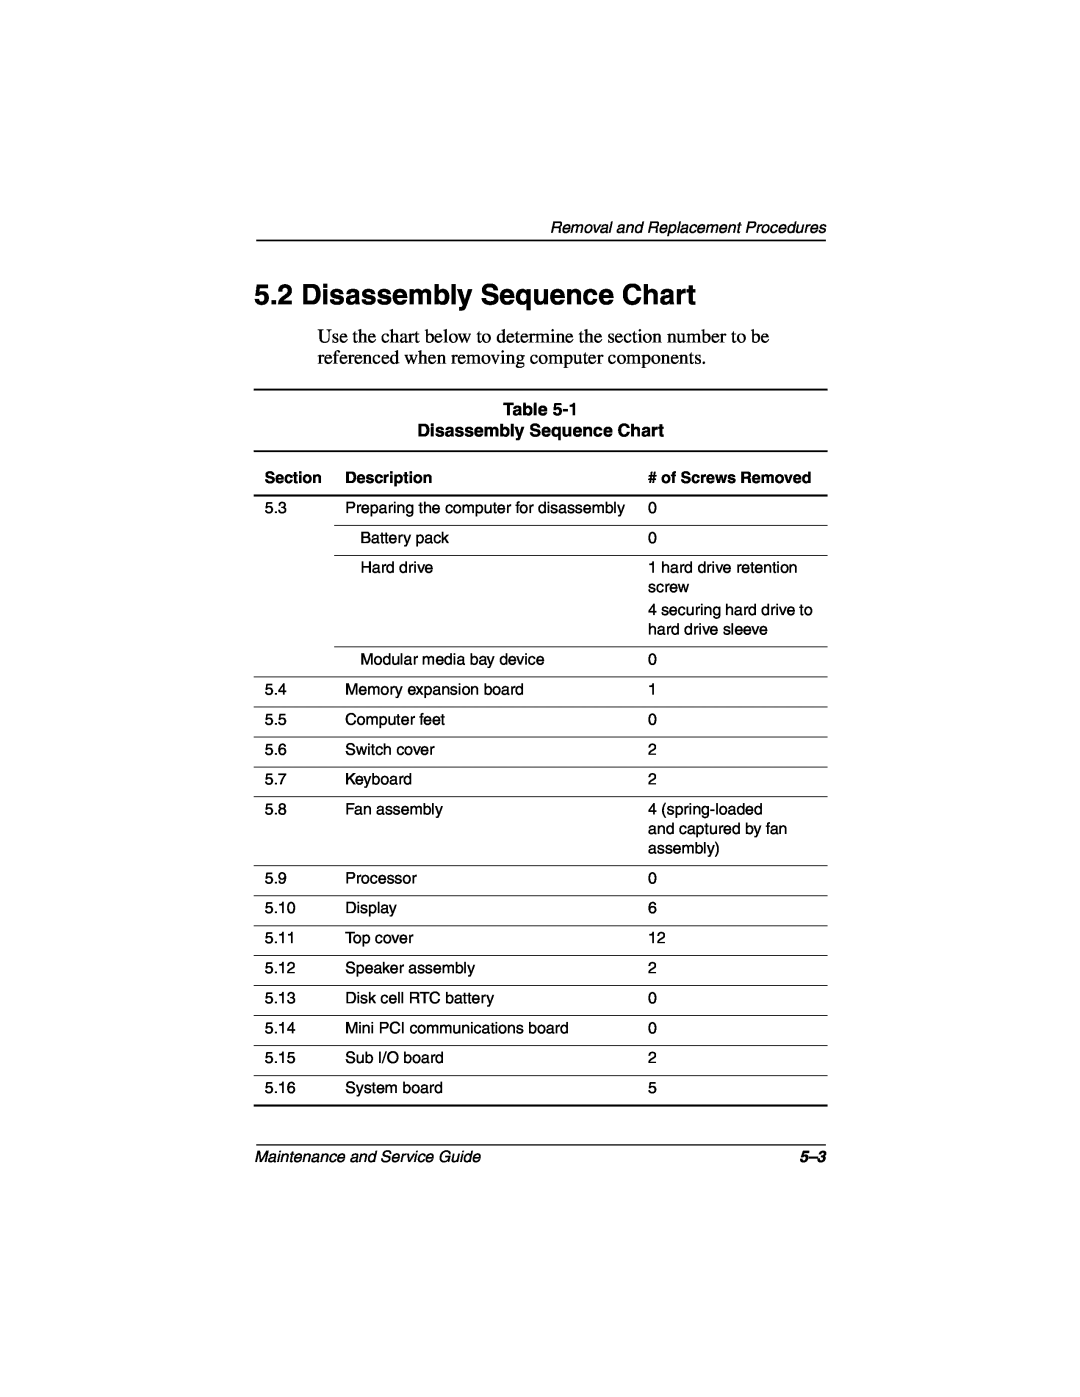 Compaq N160 manual Disassembly Sequence Chart, Removal and Replacement Procedures, Maintenance and Service Guide 